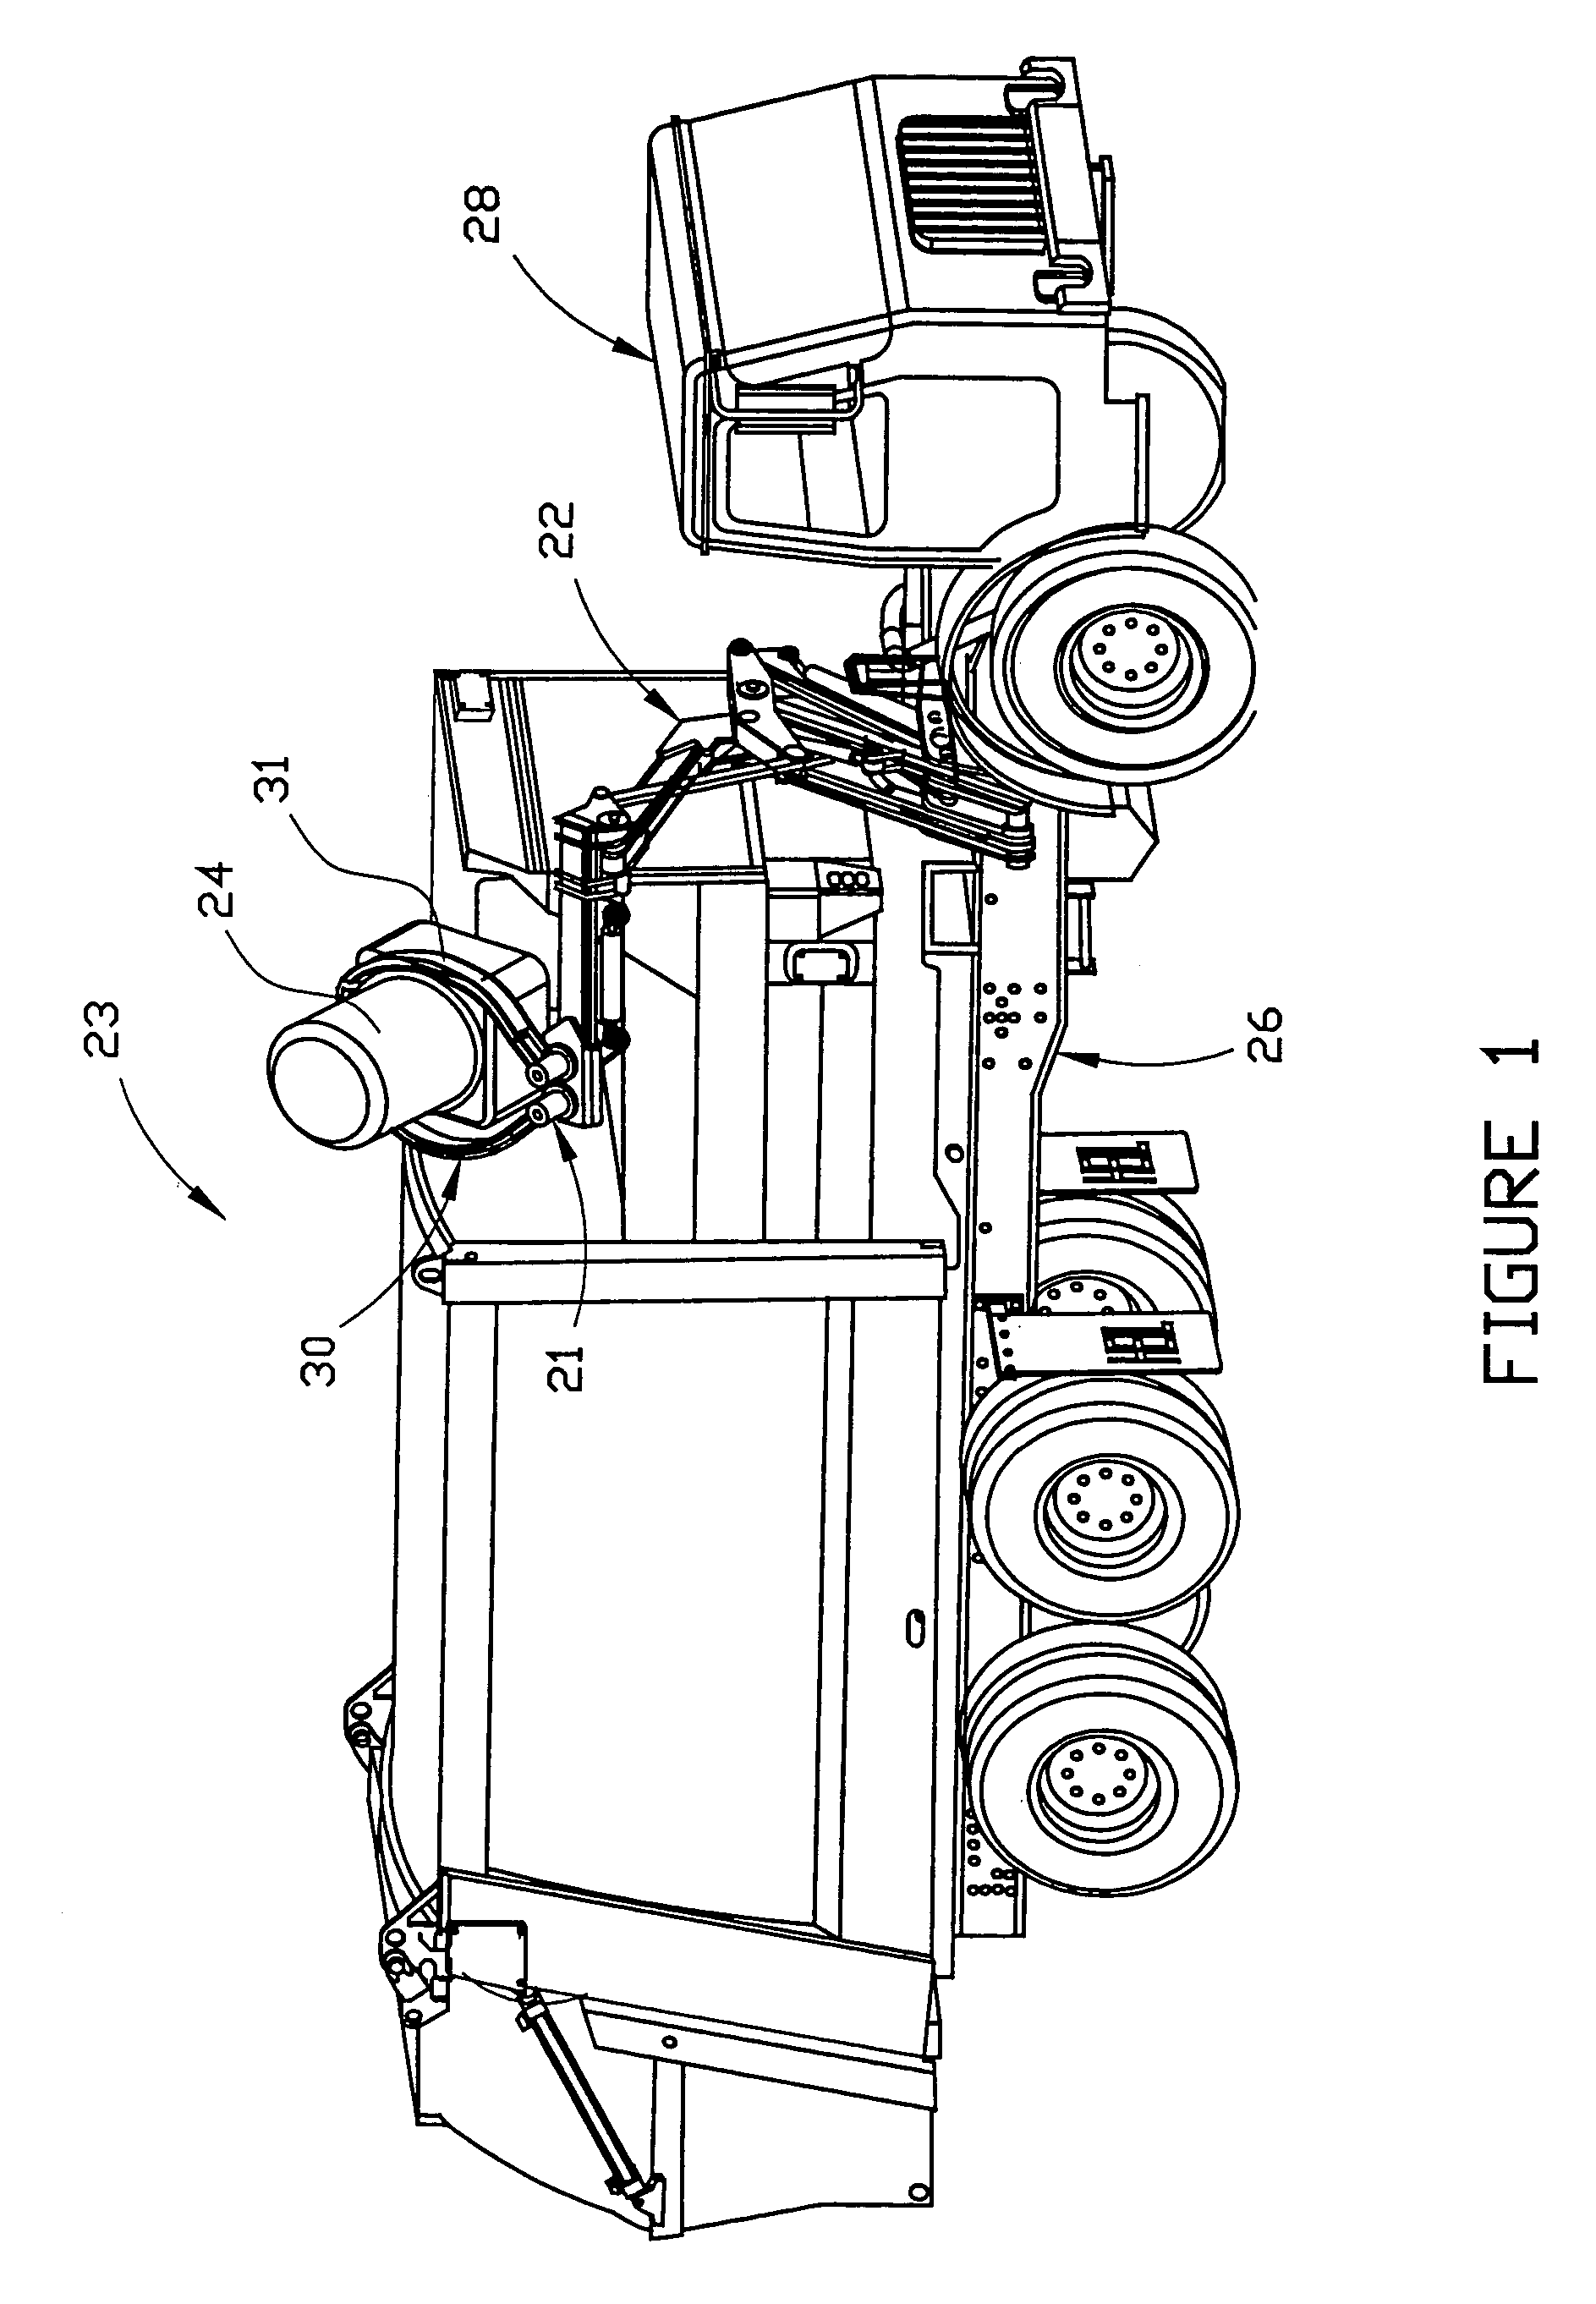 Refuse collection vehicle having multiple collection assemblies